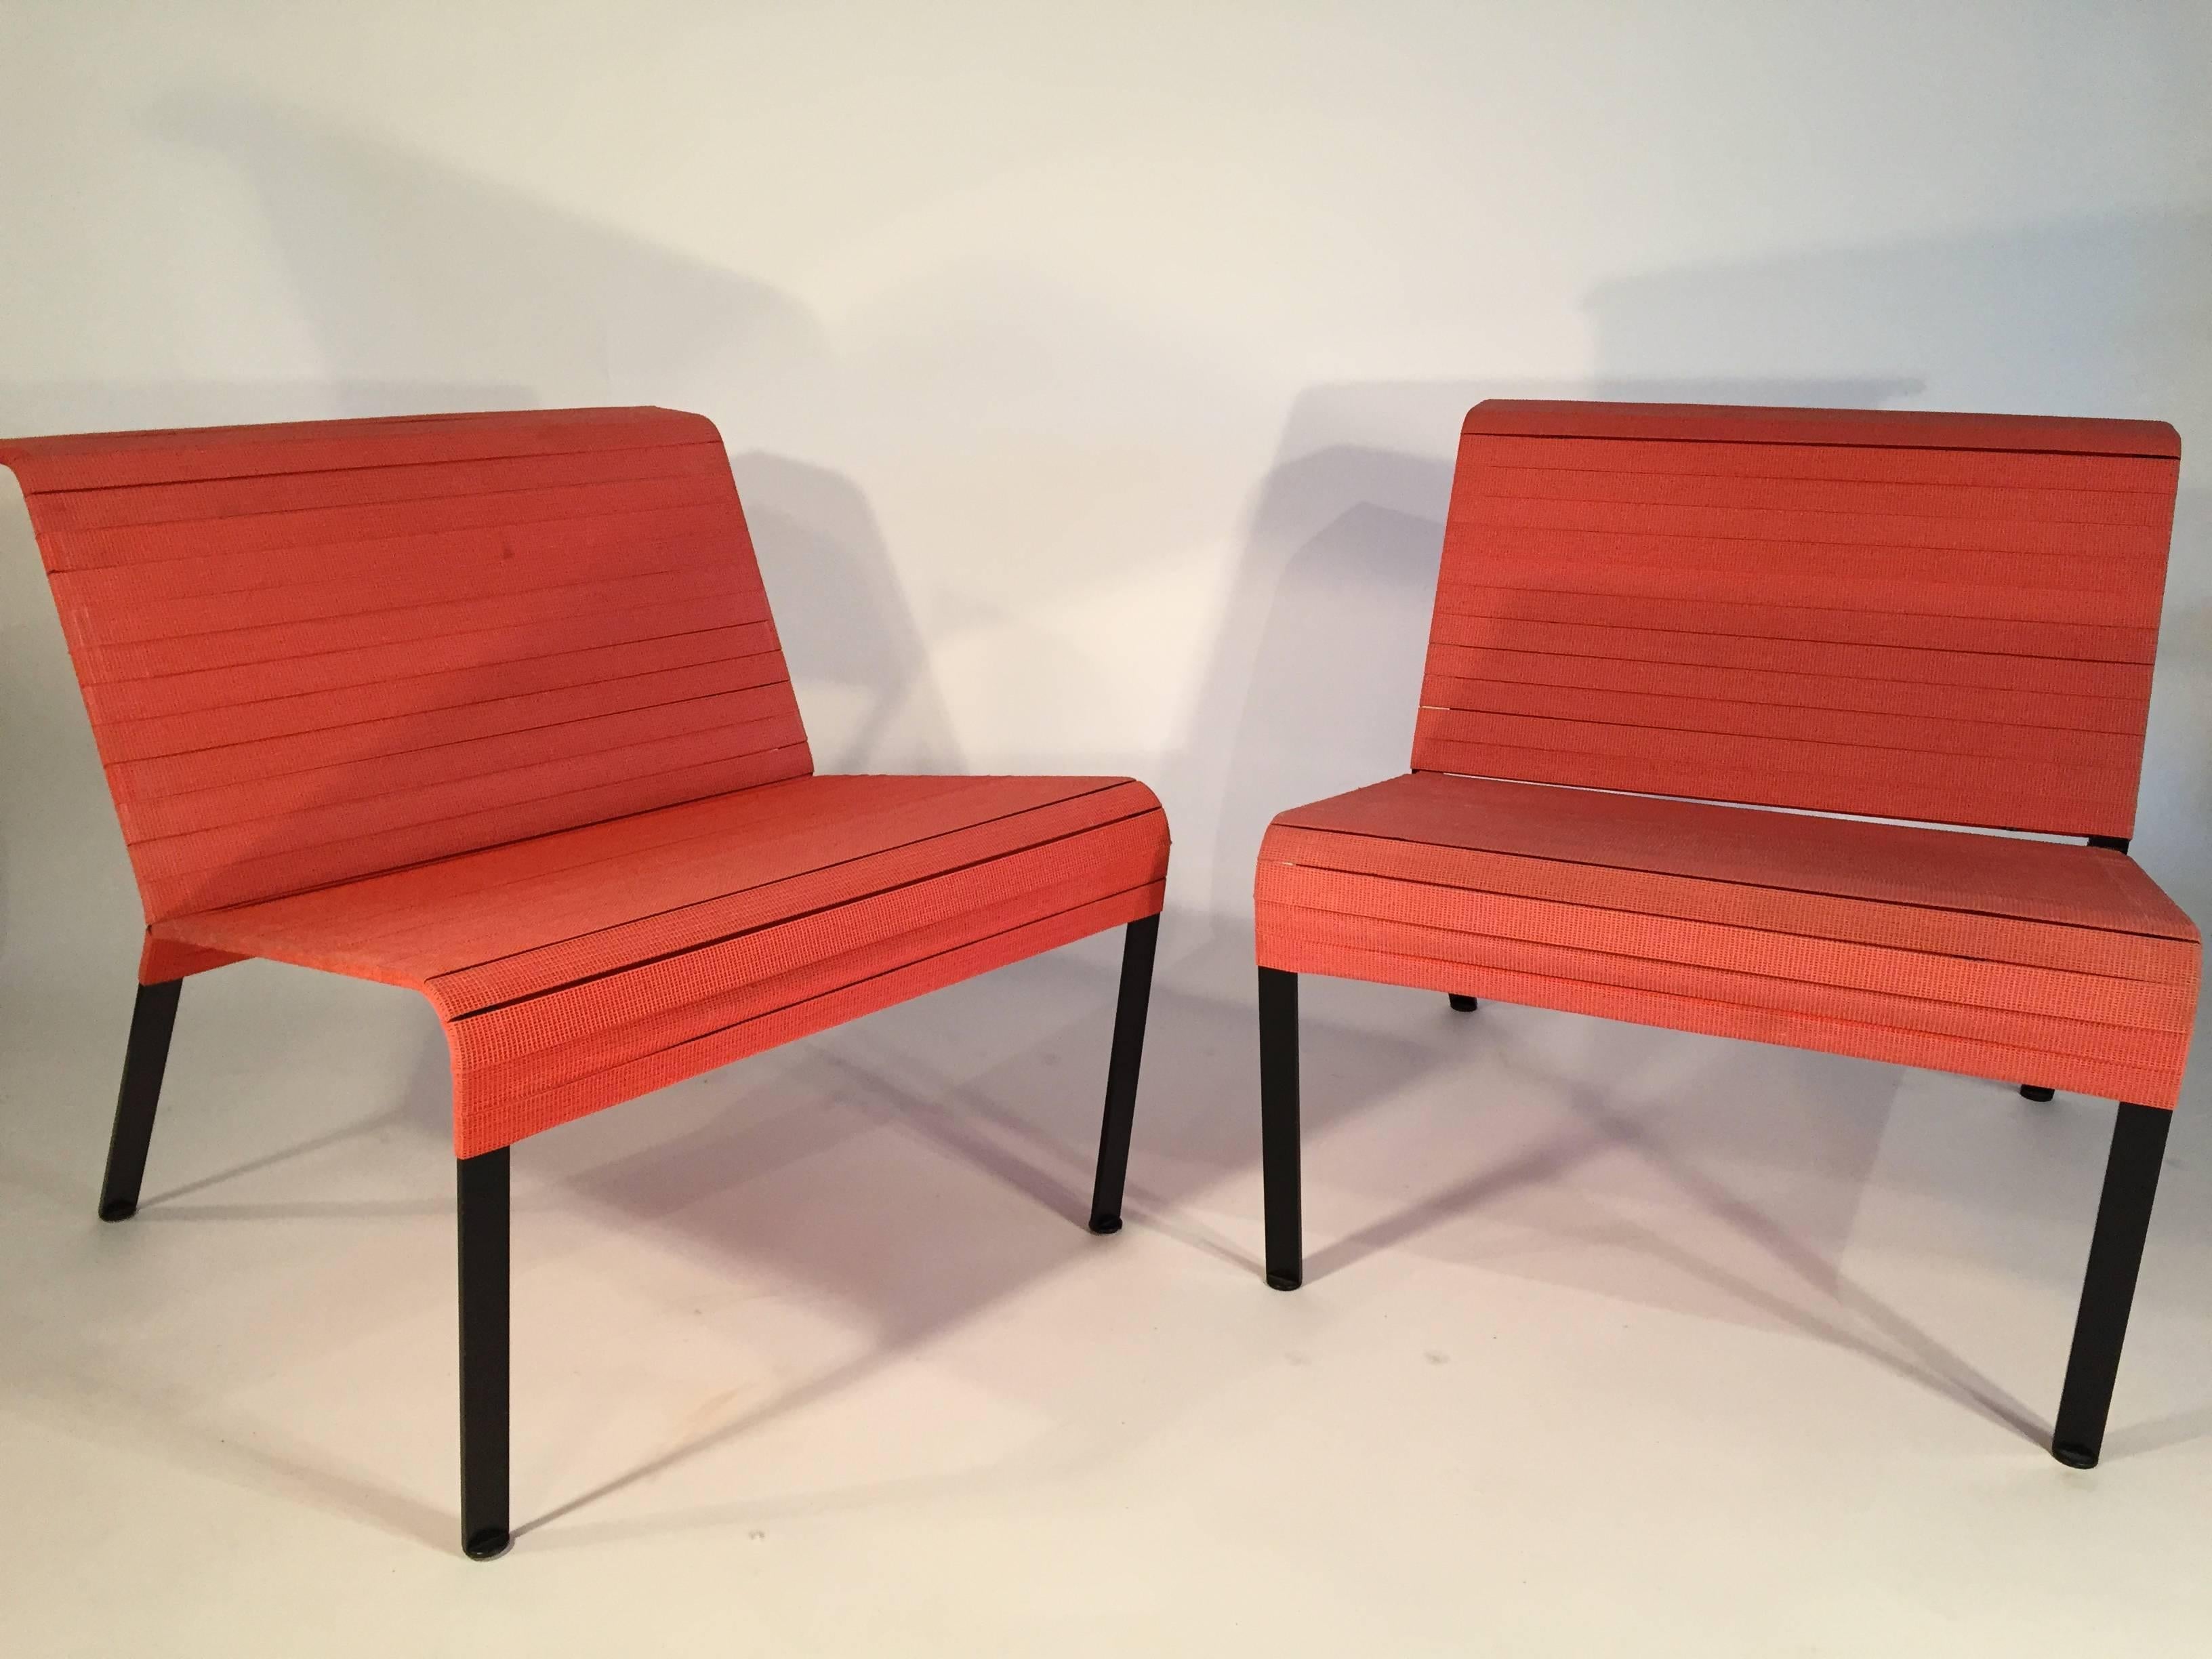 Lounge chairs with a heavy steel flat bar frame with elastic strap webbing, Italian, 1980s.